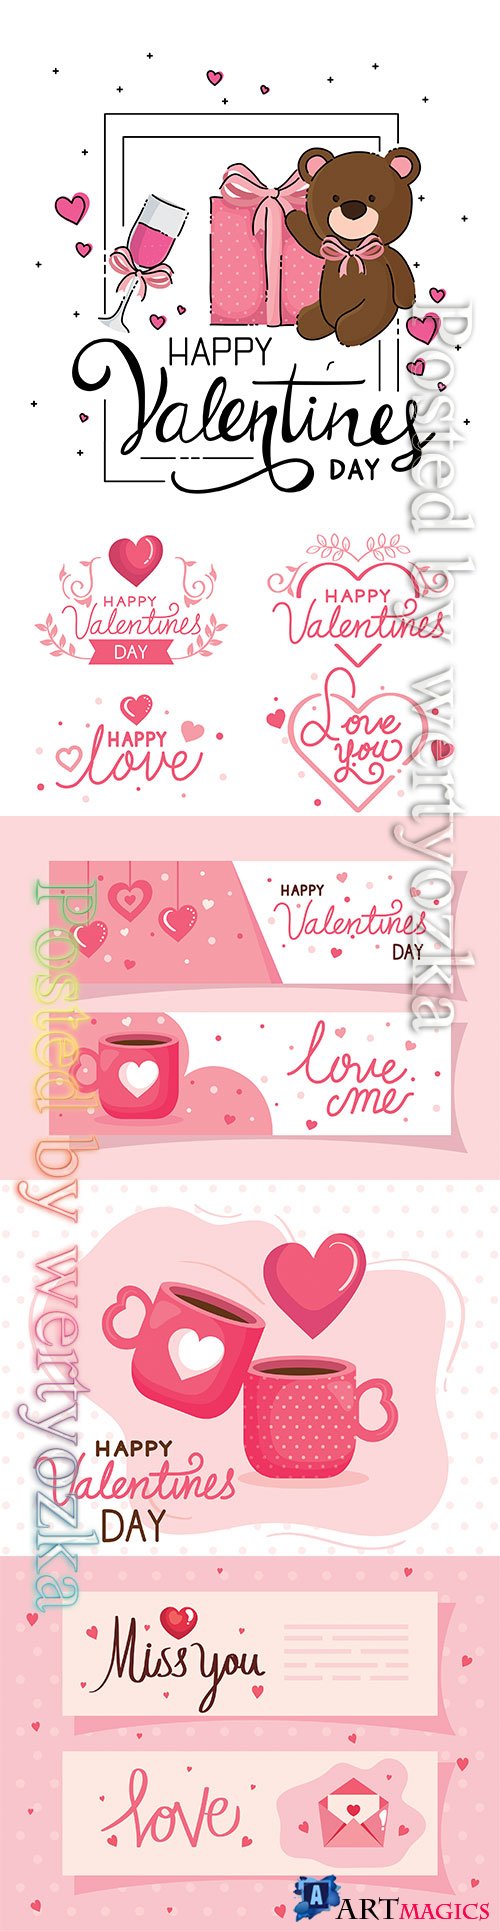 Vector cards of happy valentines day